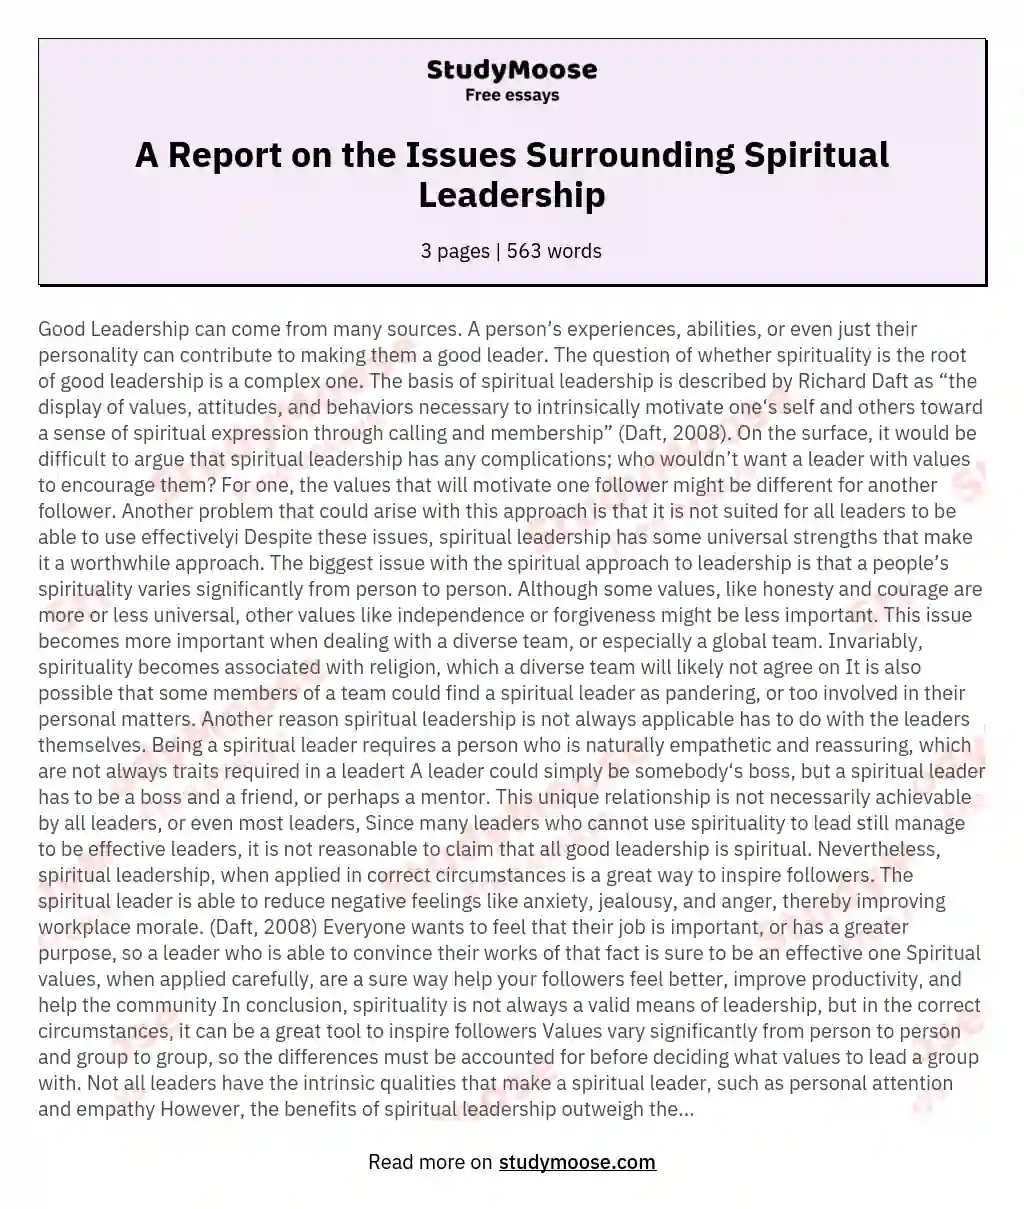 A Report on the Issues Surrounding Spiritual Leadership essay